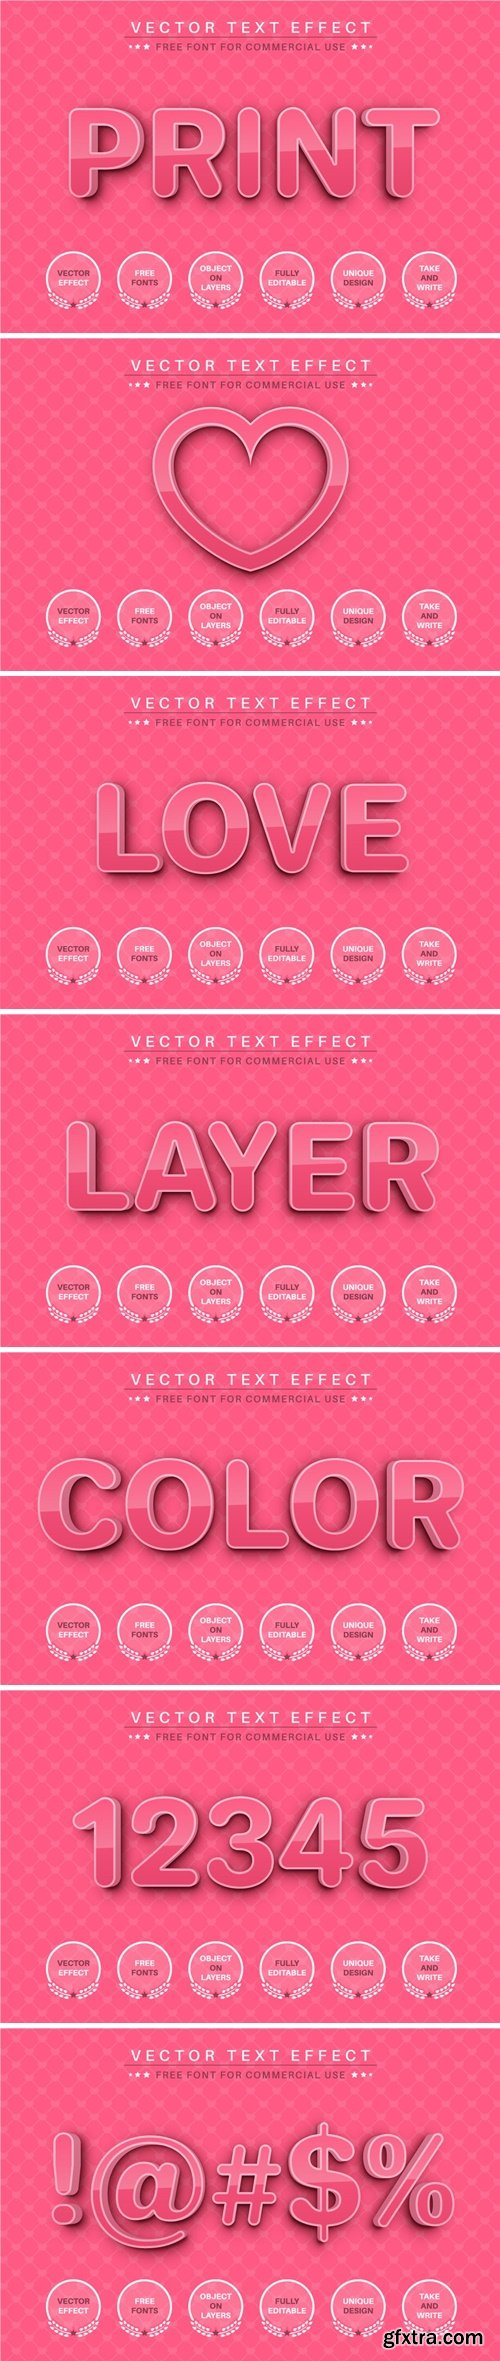 3D Pink - Editable Text Effect, Font Style